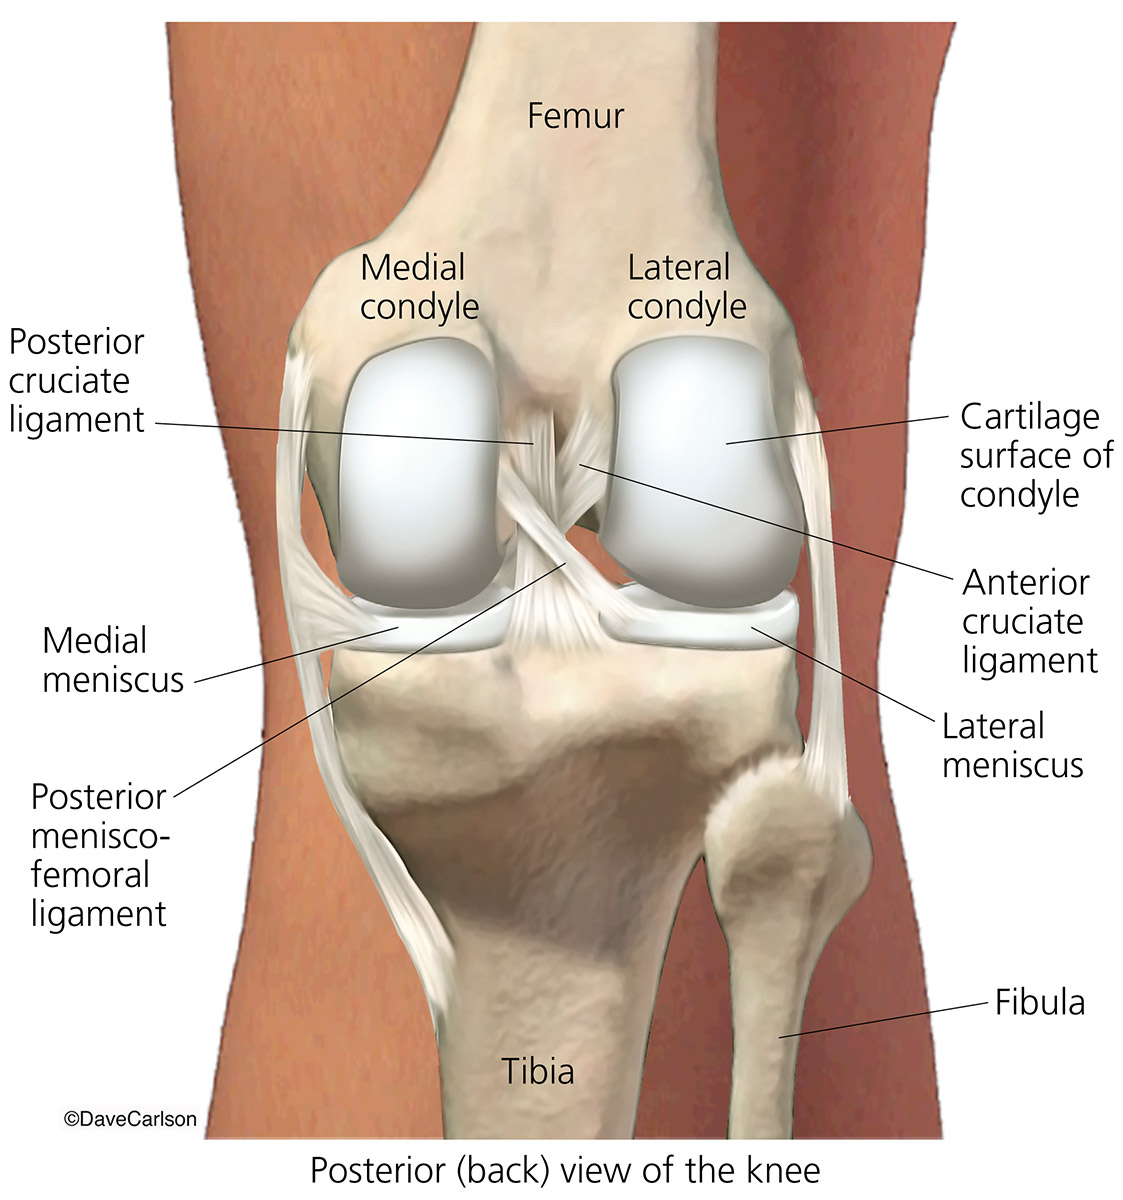 Illustration showing posterior view of the knee joint, including bones, ligaments and menisci.&nbsp;